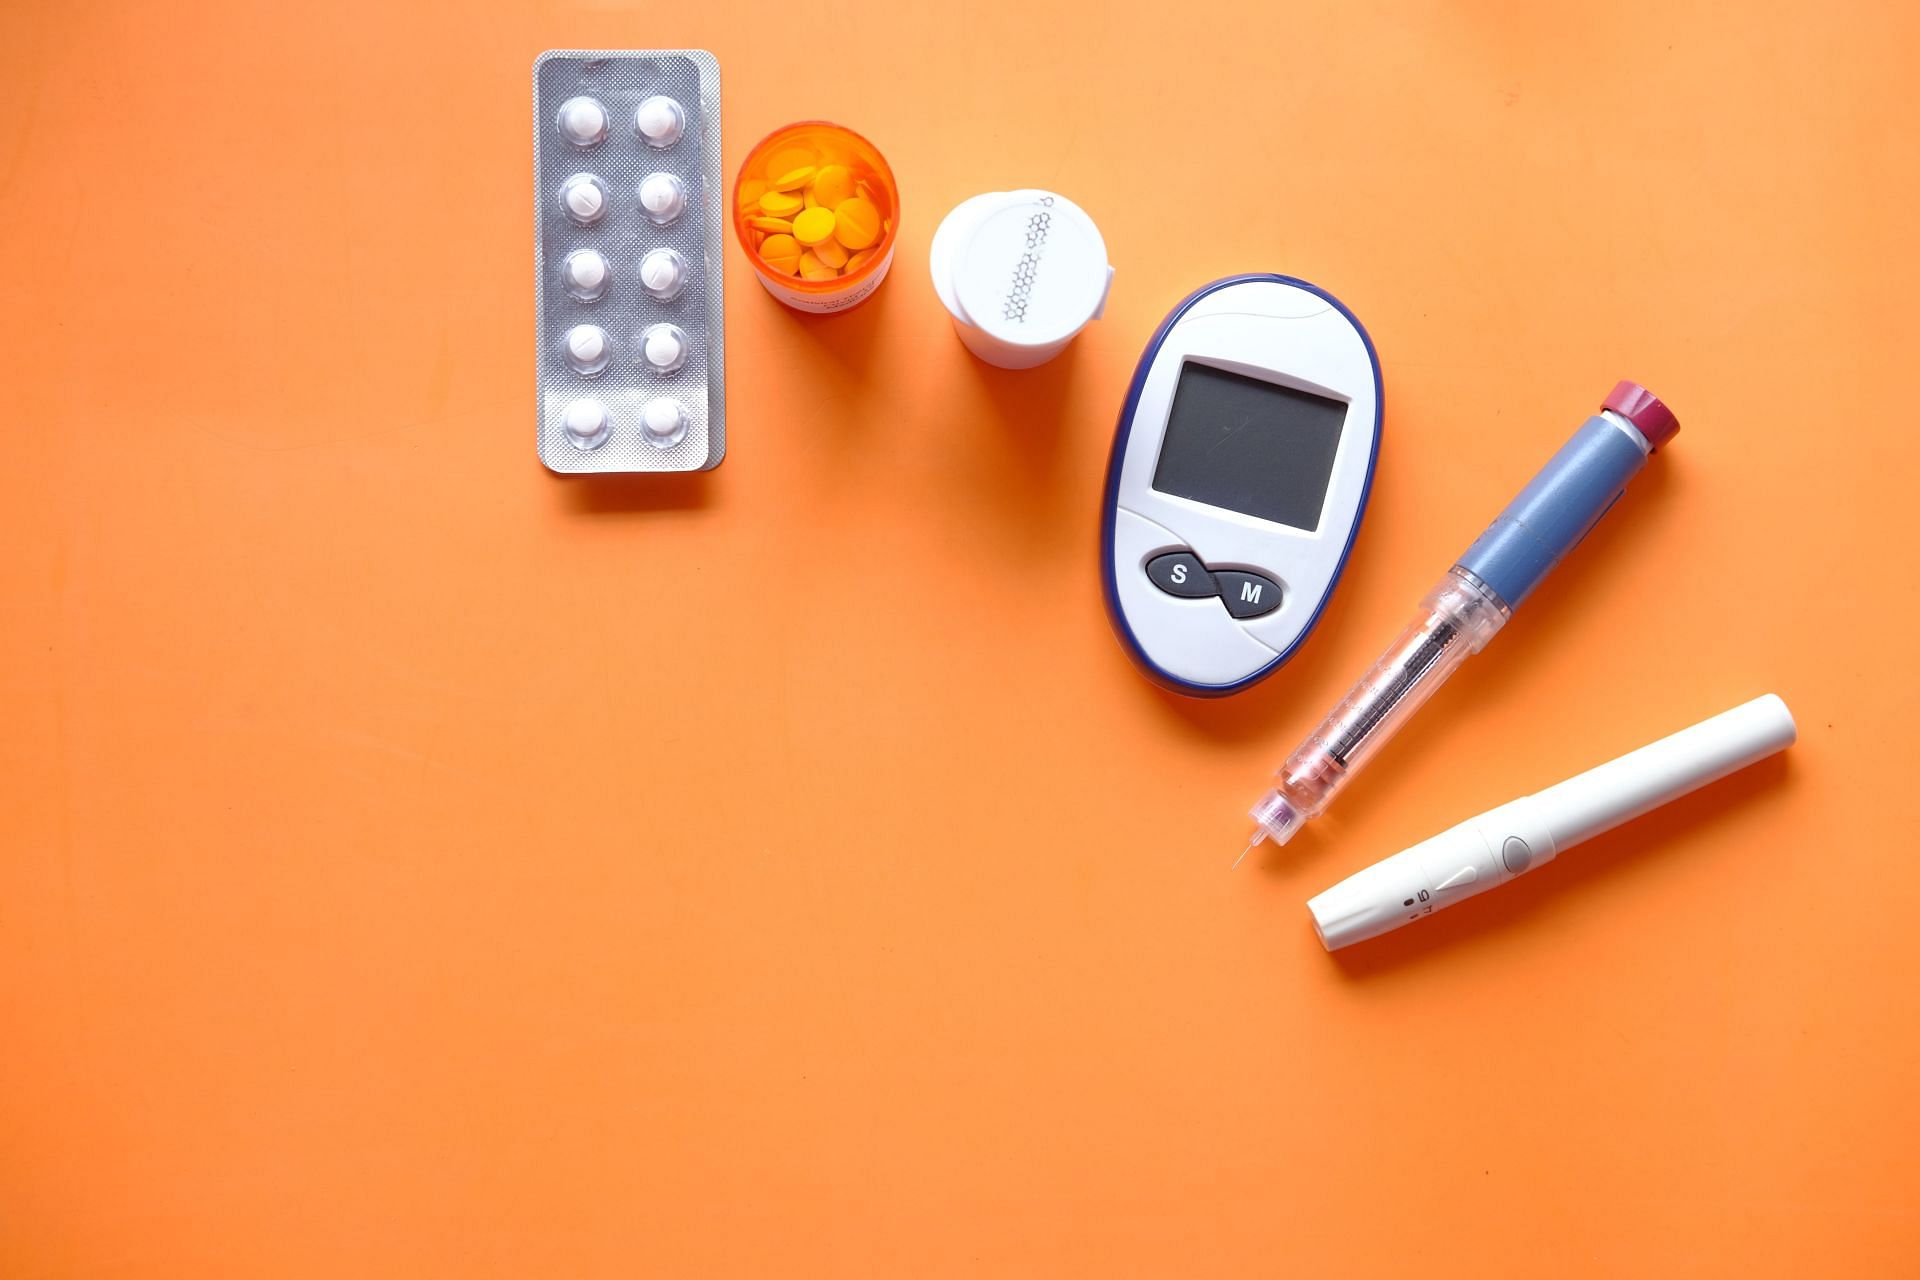 People with excess body fat are at higher risk of diabetes. (Image via Unsplash/Towfiqu Barbhuiya)